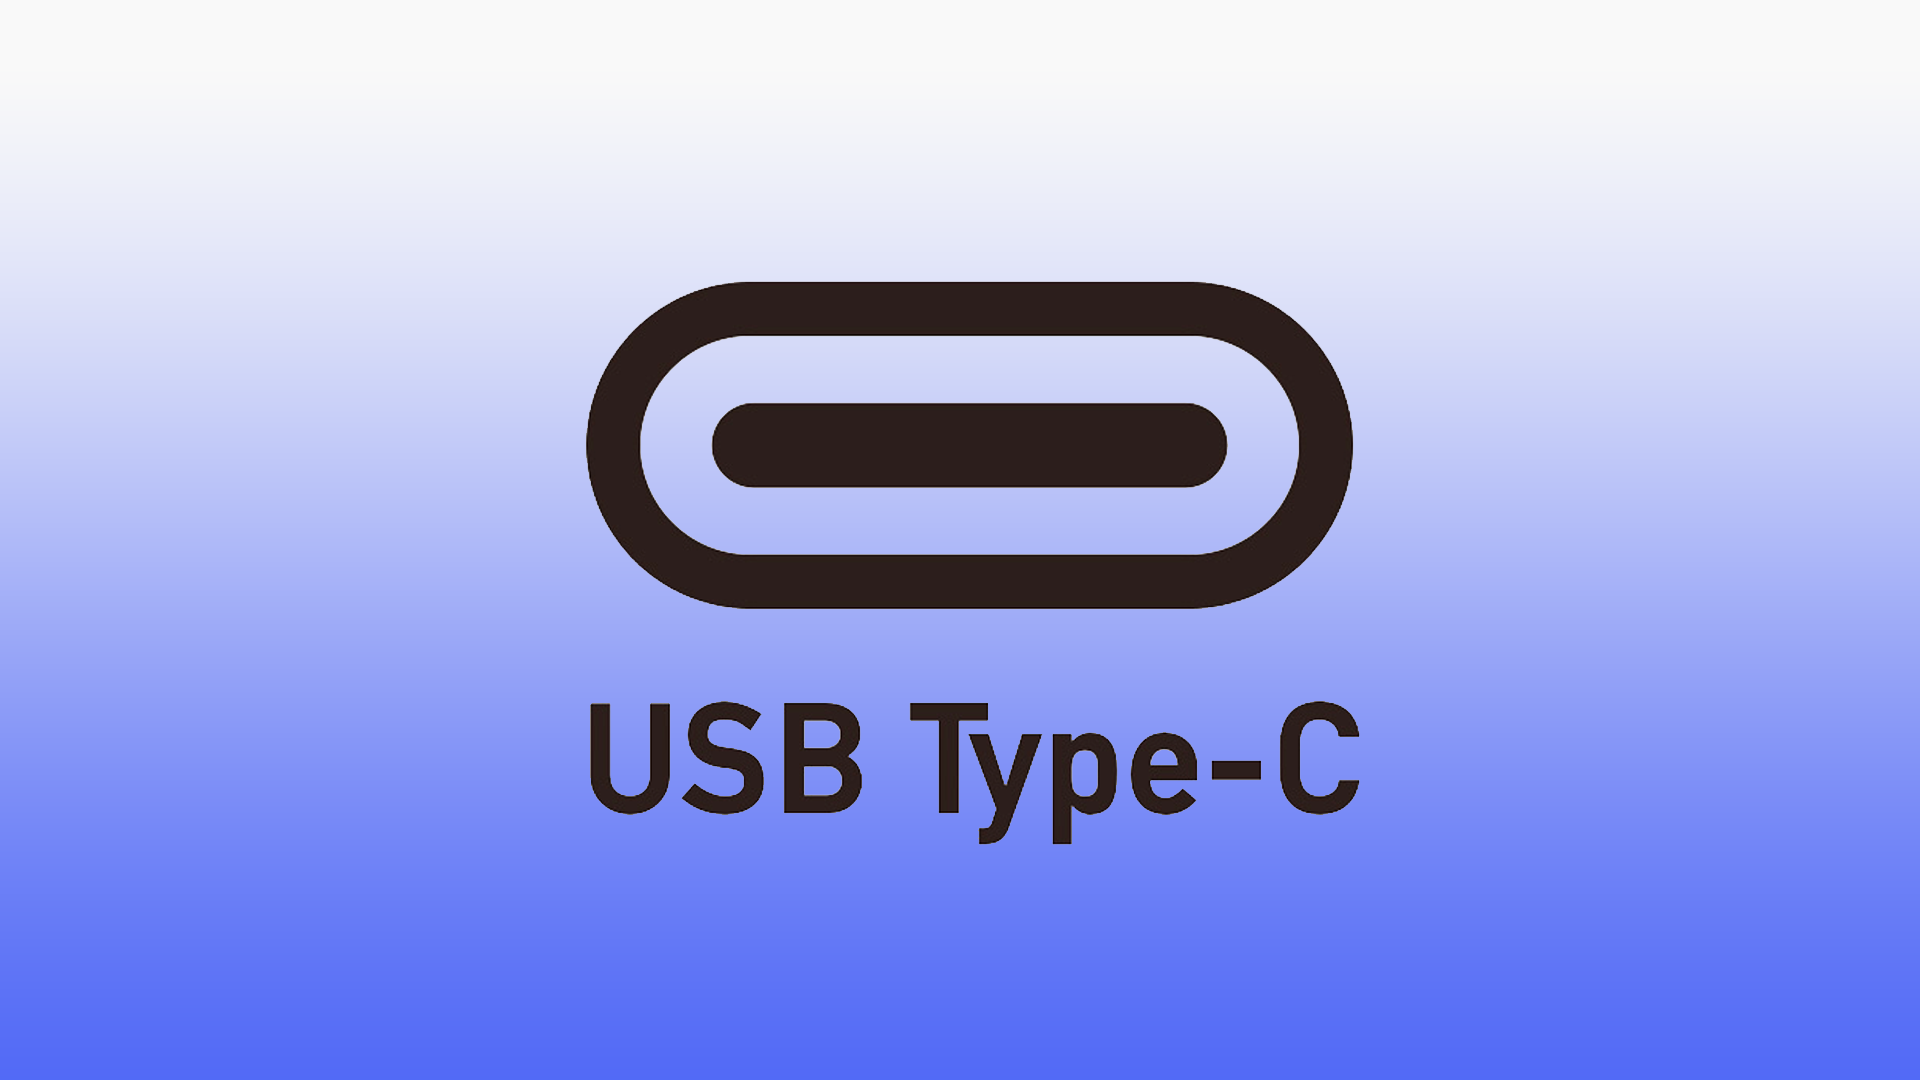 USB-C will become mandatory for mobile devices in Europe at the end of 2024